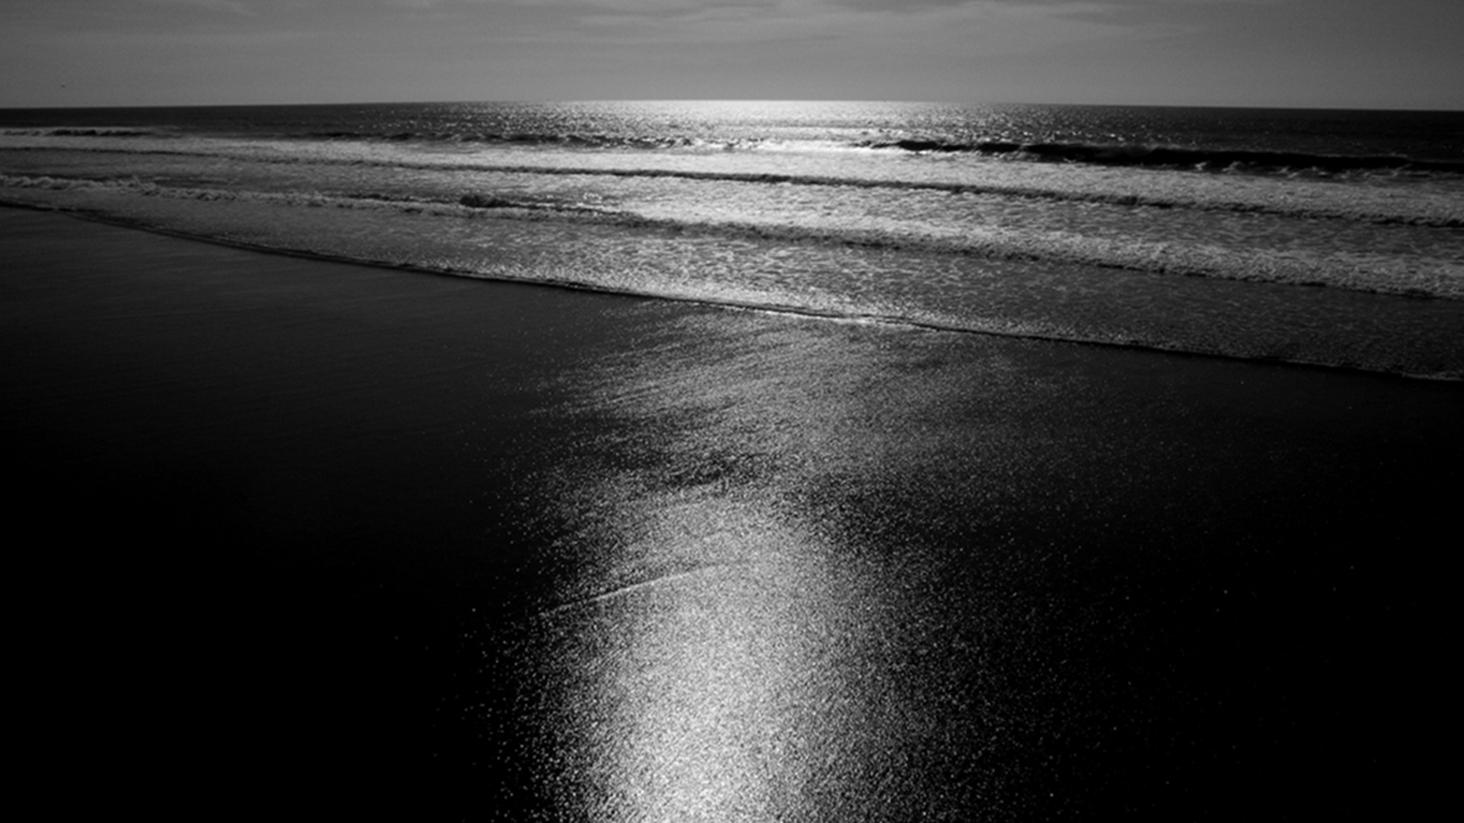 Black & White Abstract Photography by Geoffrey Baris, Seascape, Ocean, Beach